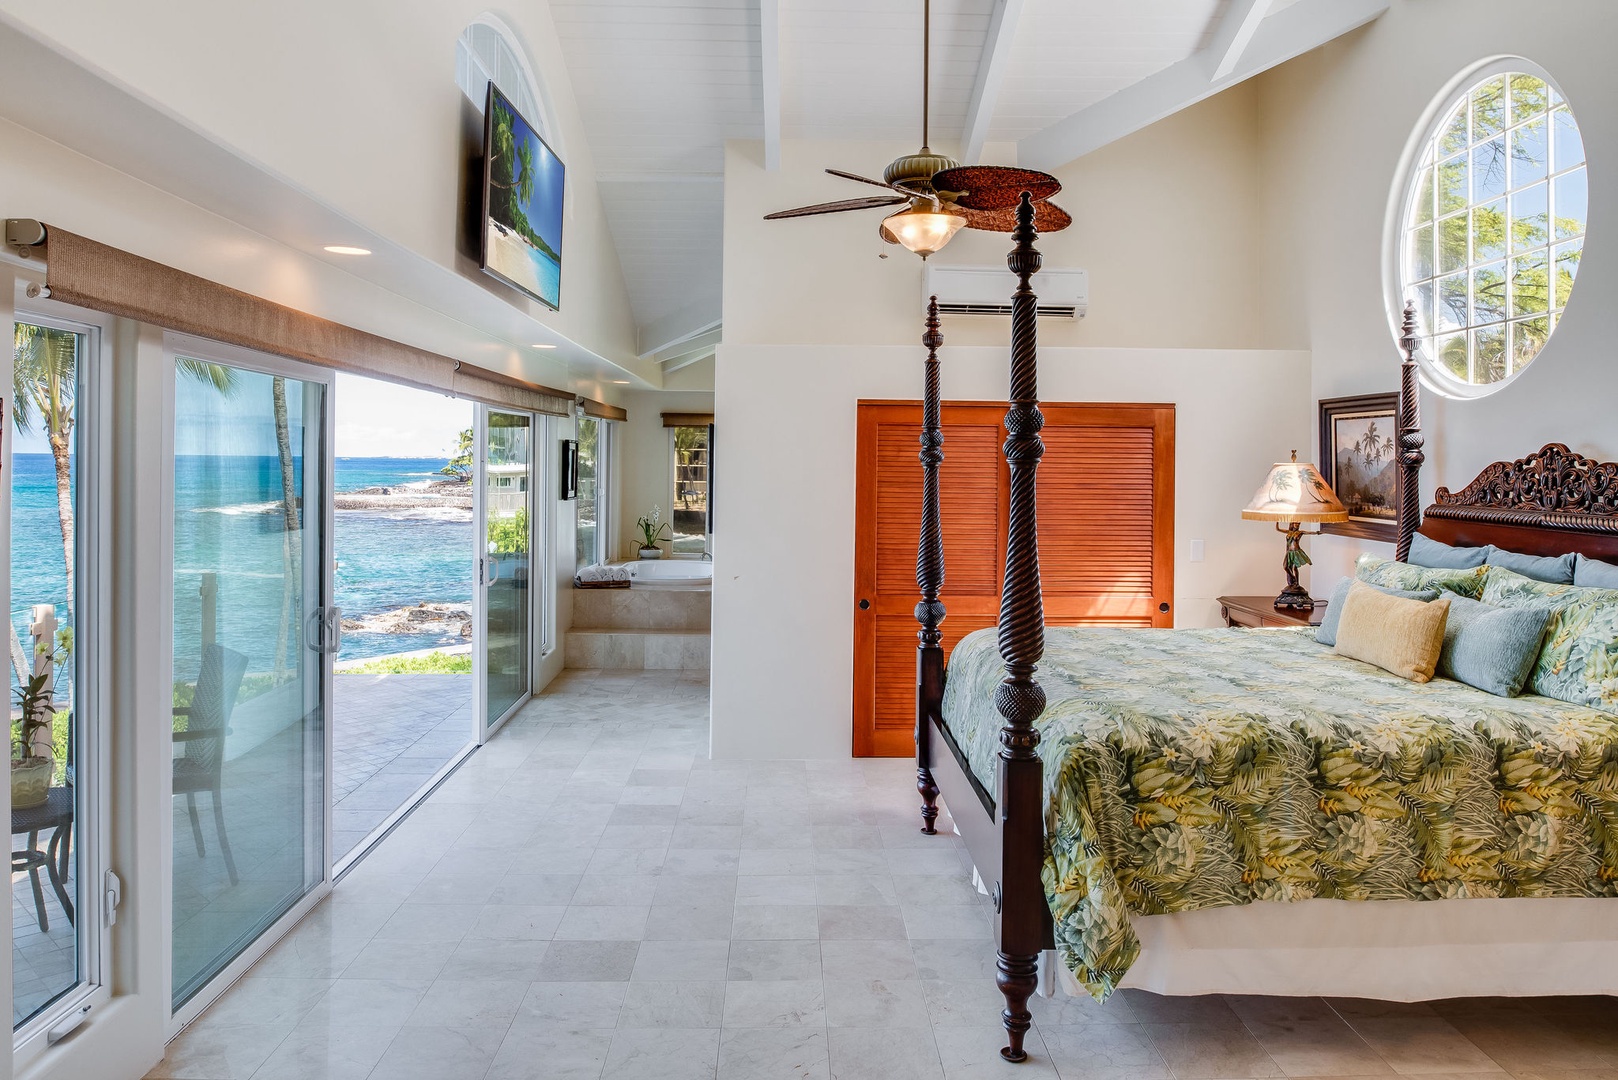 Kailua Kona Vacation Rentals, Kona Beach Bungalows** - Experience grandeur in the Lihikai Master Suite, boasting a plush king bed, state-of-the-art TV, and a luxurious spa-inspired ensuite.